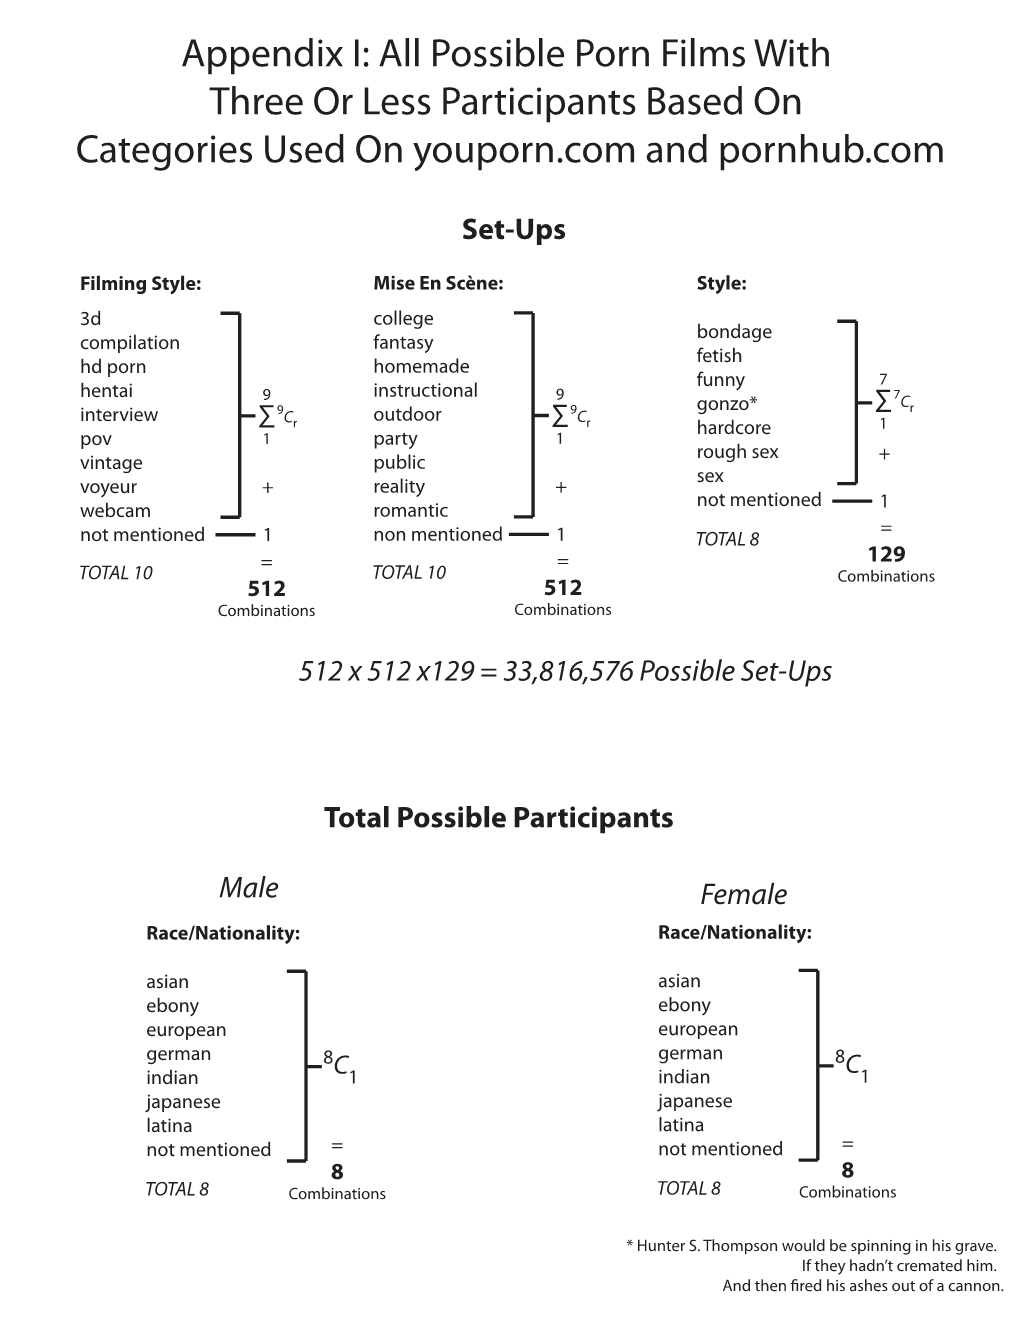 Appendix I: All Possible Porn Films with Three Or Less Participants Based on Categories Used on Youporn.Com and Pornhub.Com